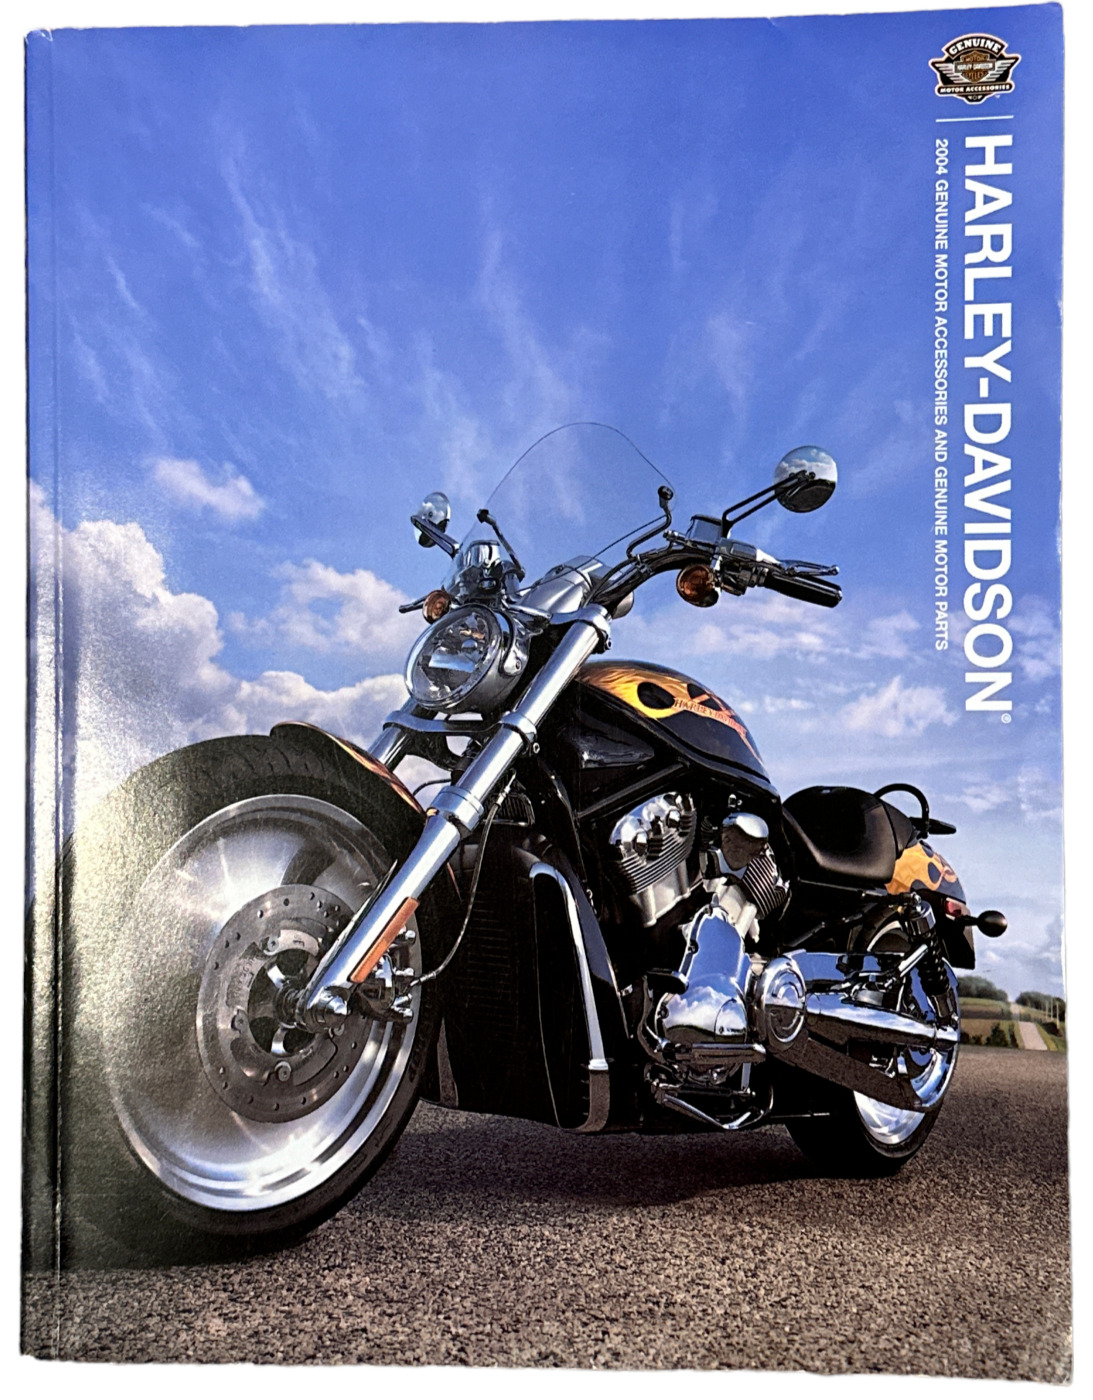 2004 Harley Davidson Motorcycle Catalog Accessories and Genuine Motor Parts Book